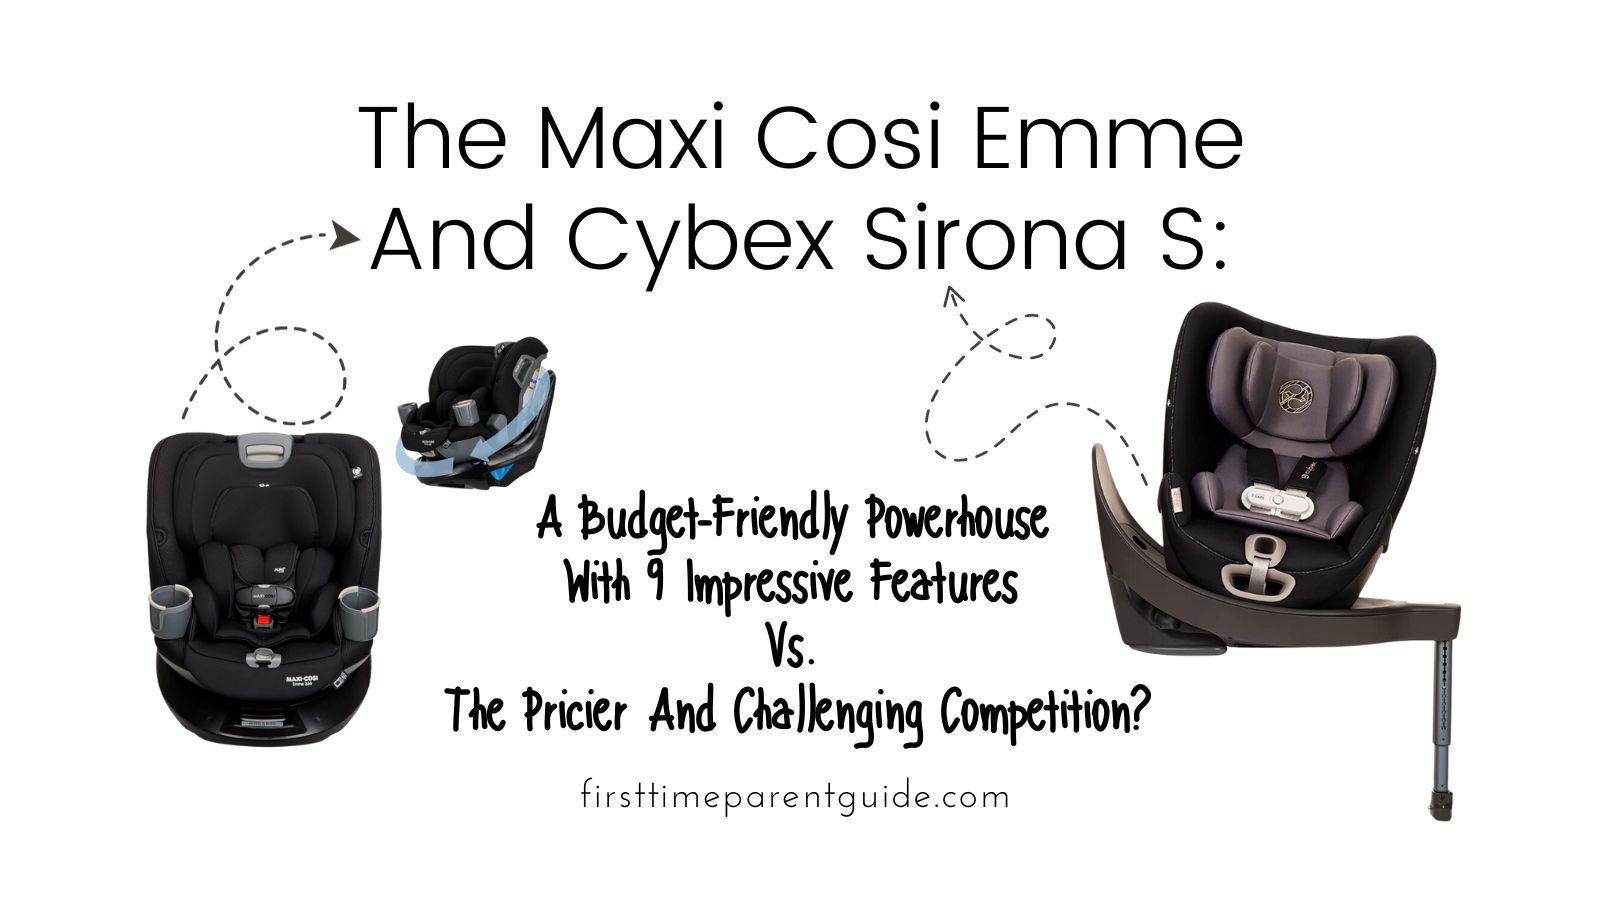 The Maxi Cosi Emme And